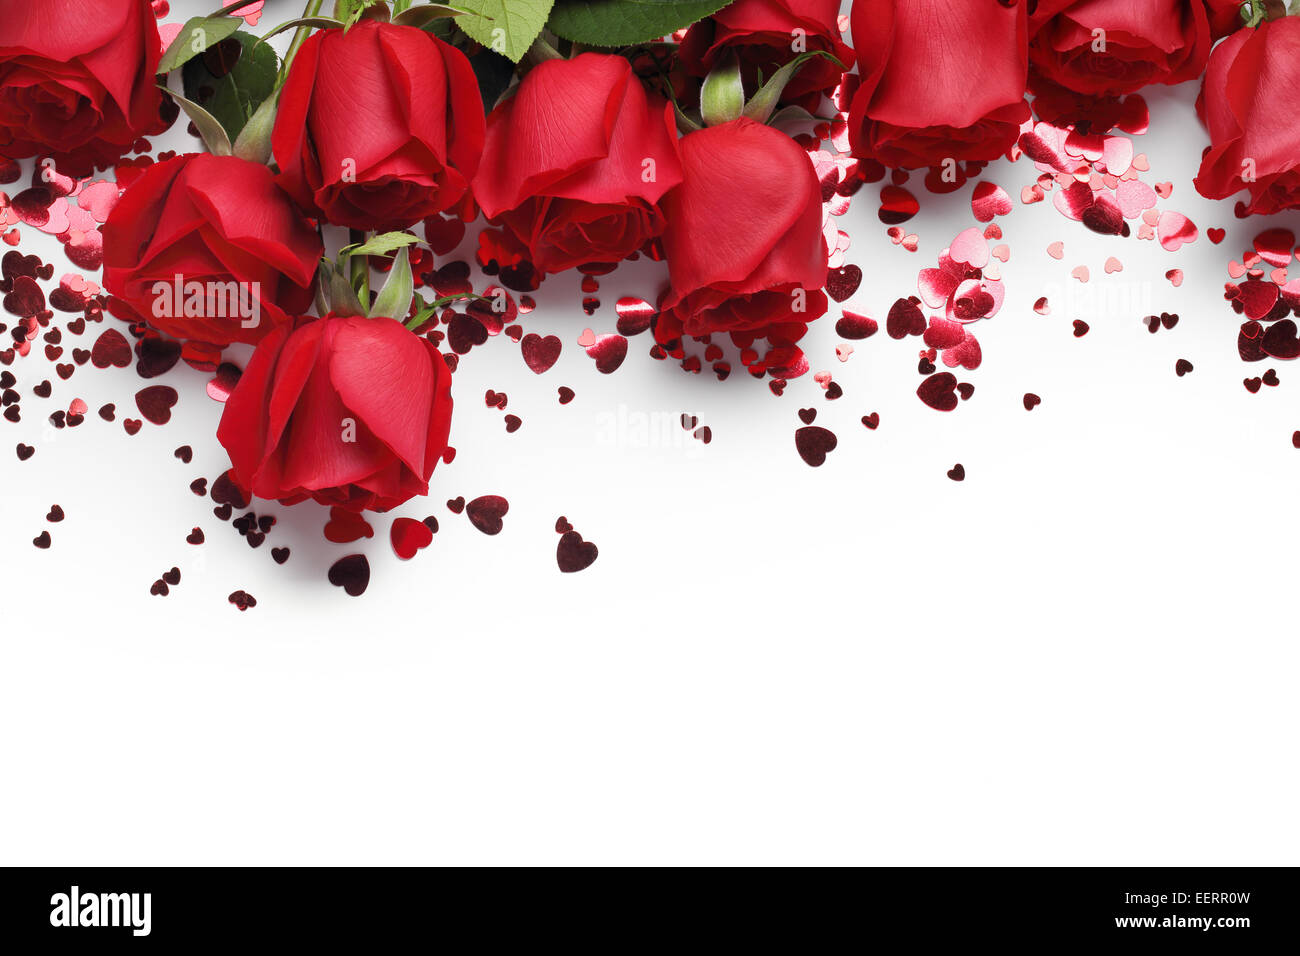 Red roses and heart shape ornaments on white background Stock Photo